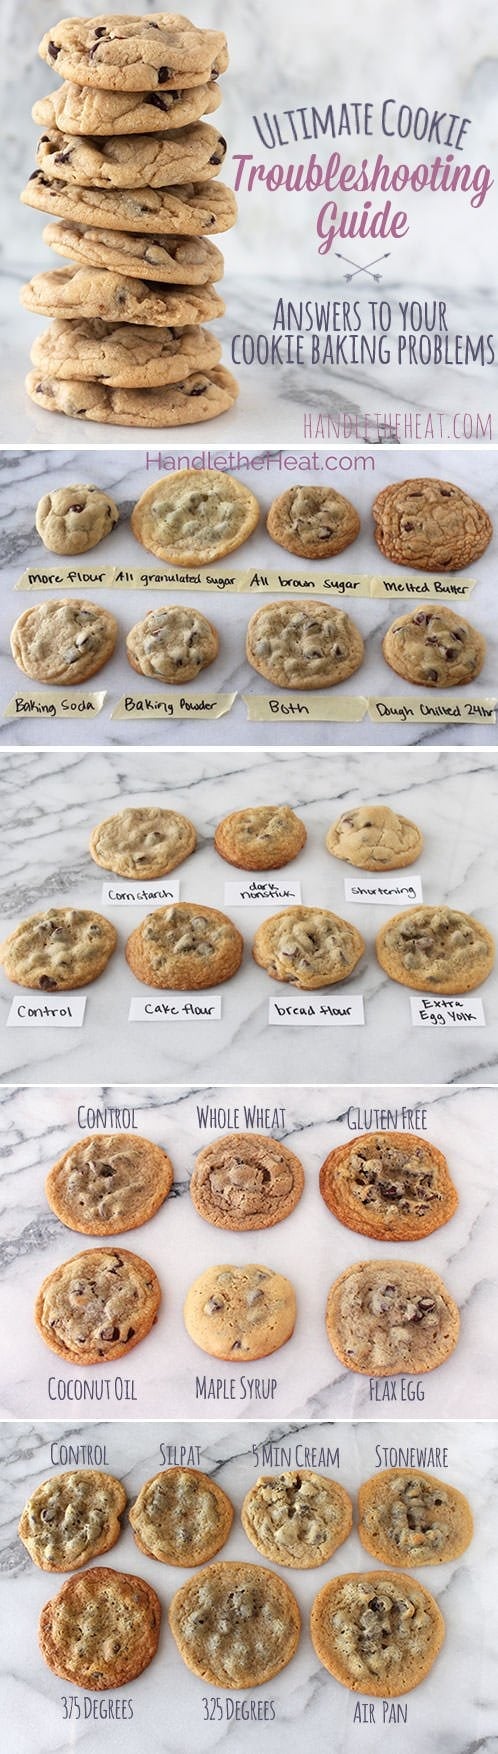 http://www.handletheheat.com/wp-content/uploads/2014/08/Ultimate-Cookie-Troubleshooting-Guide-Collage-Correct.jpg